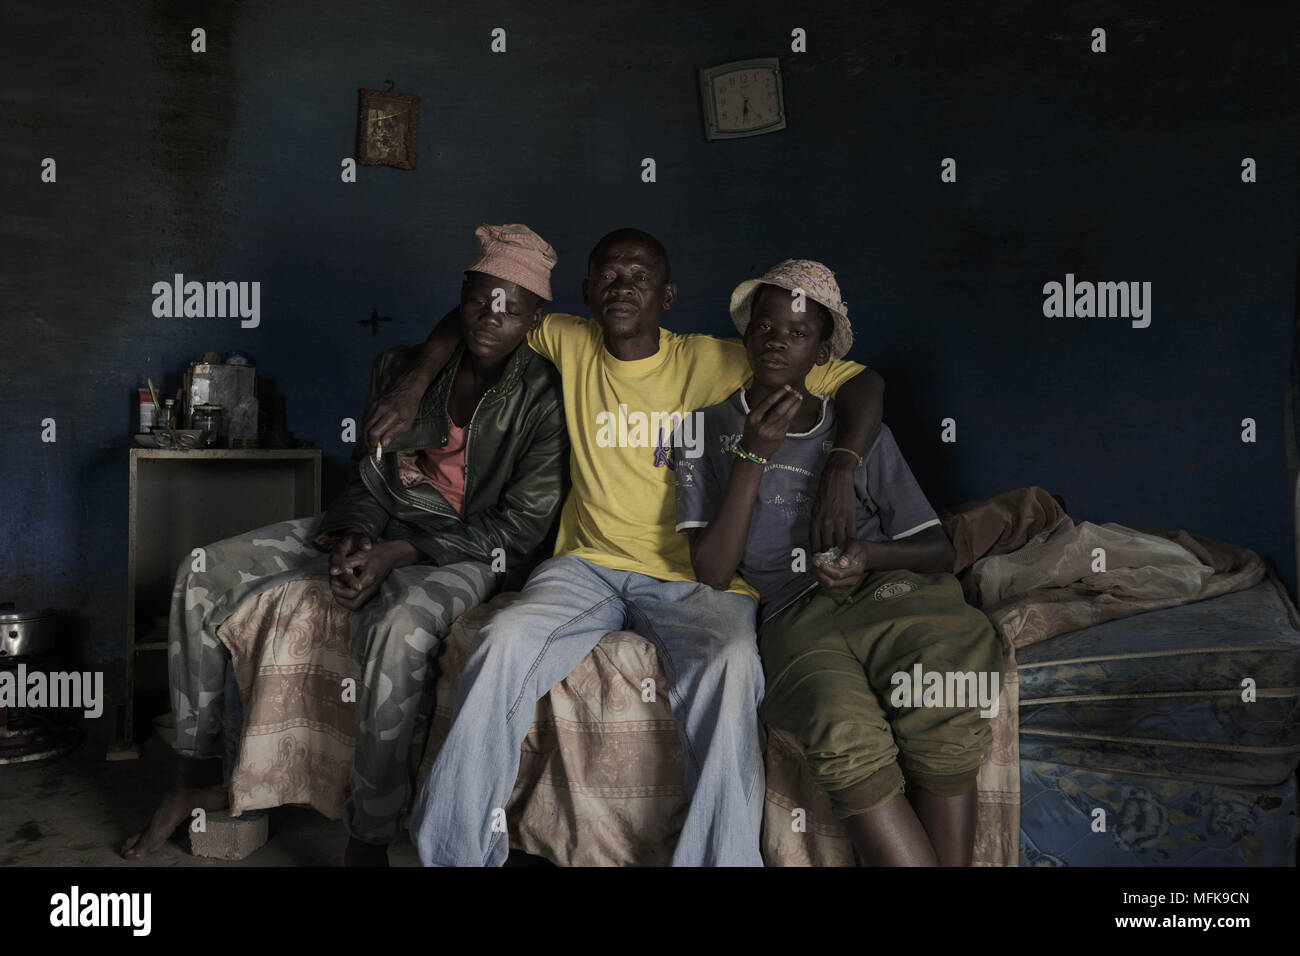 January 12, 2018 - Matatiele, Eastern Cape, South Africa - A father and heavy drinker, sits with his two suns Luis (14) and  Malike (18) on the bed in their mud house. The blue round shaped house serves as a sleeping room, community area and as a kitchen. (Credit Image: © Stefan Kleinowitz via ZUMA Wire) Stock Photo